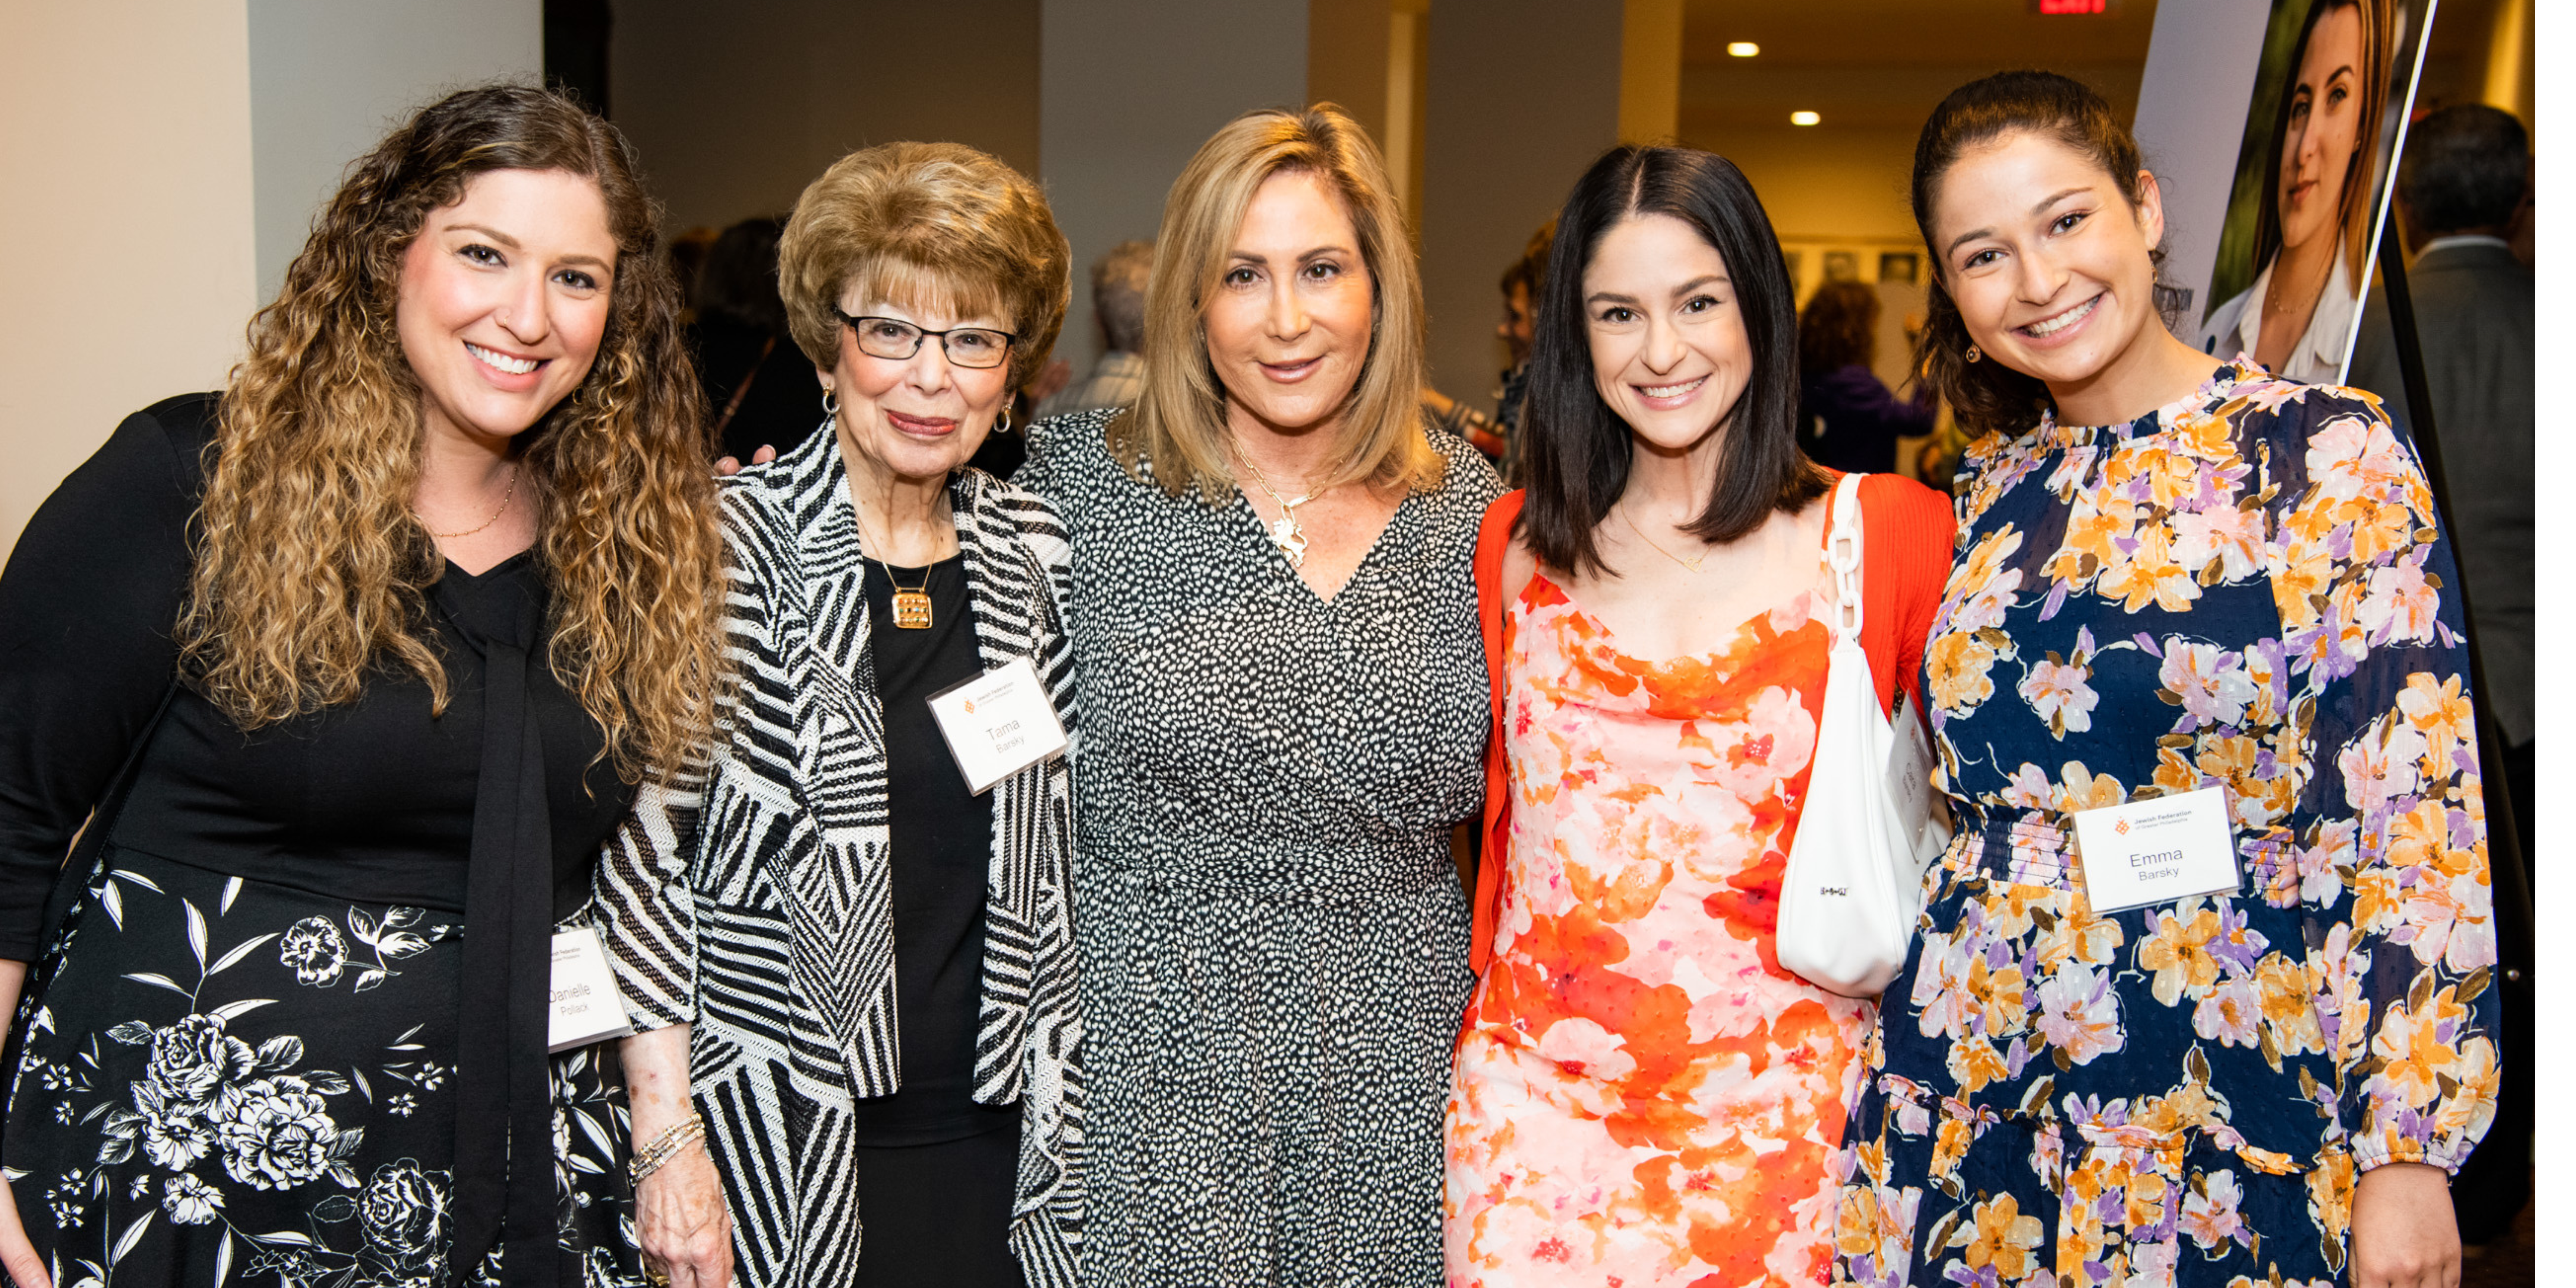 Women of Vision Holds Its Annual Spring Event with Award-Winning Jewish Author Qian Julie Wang